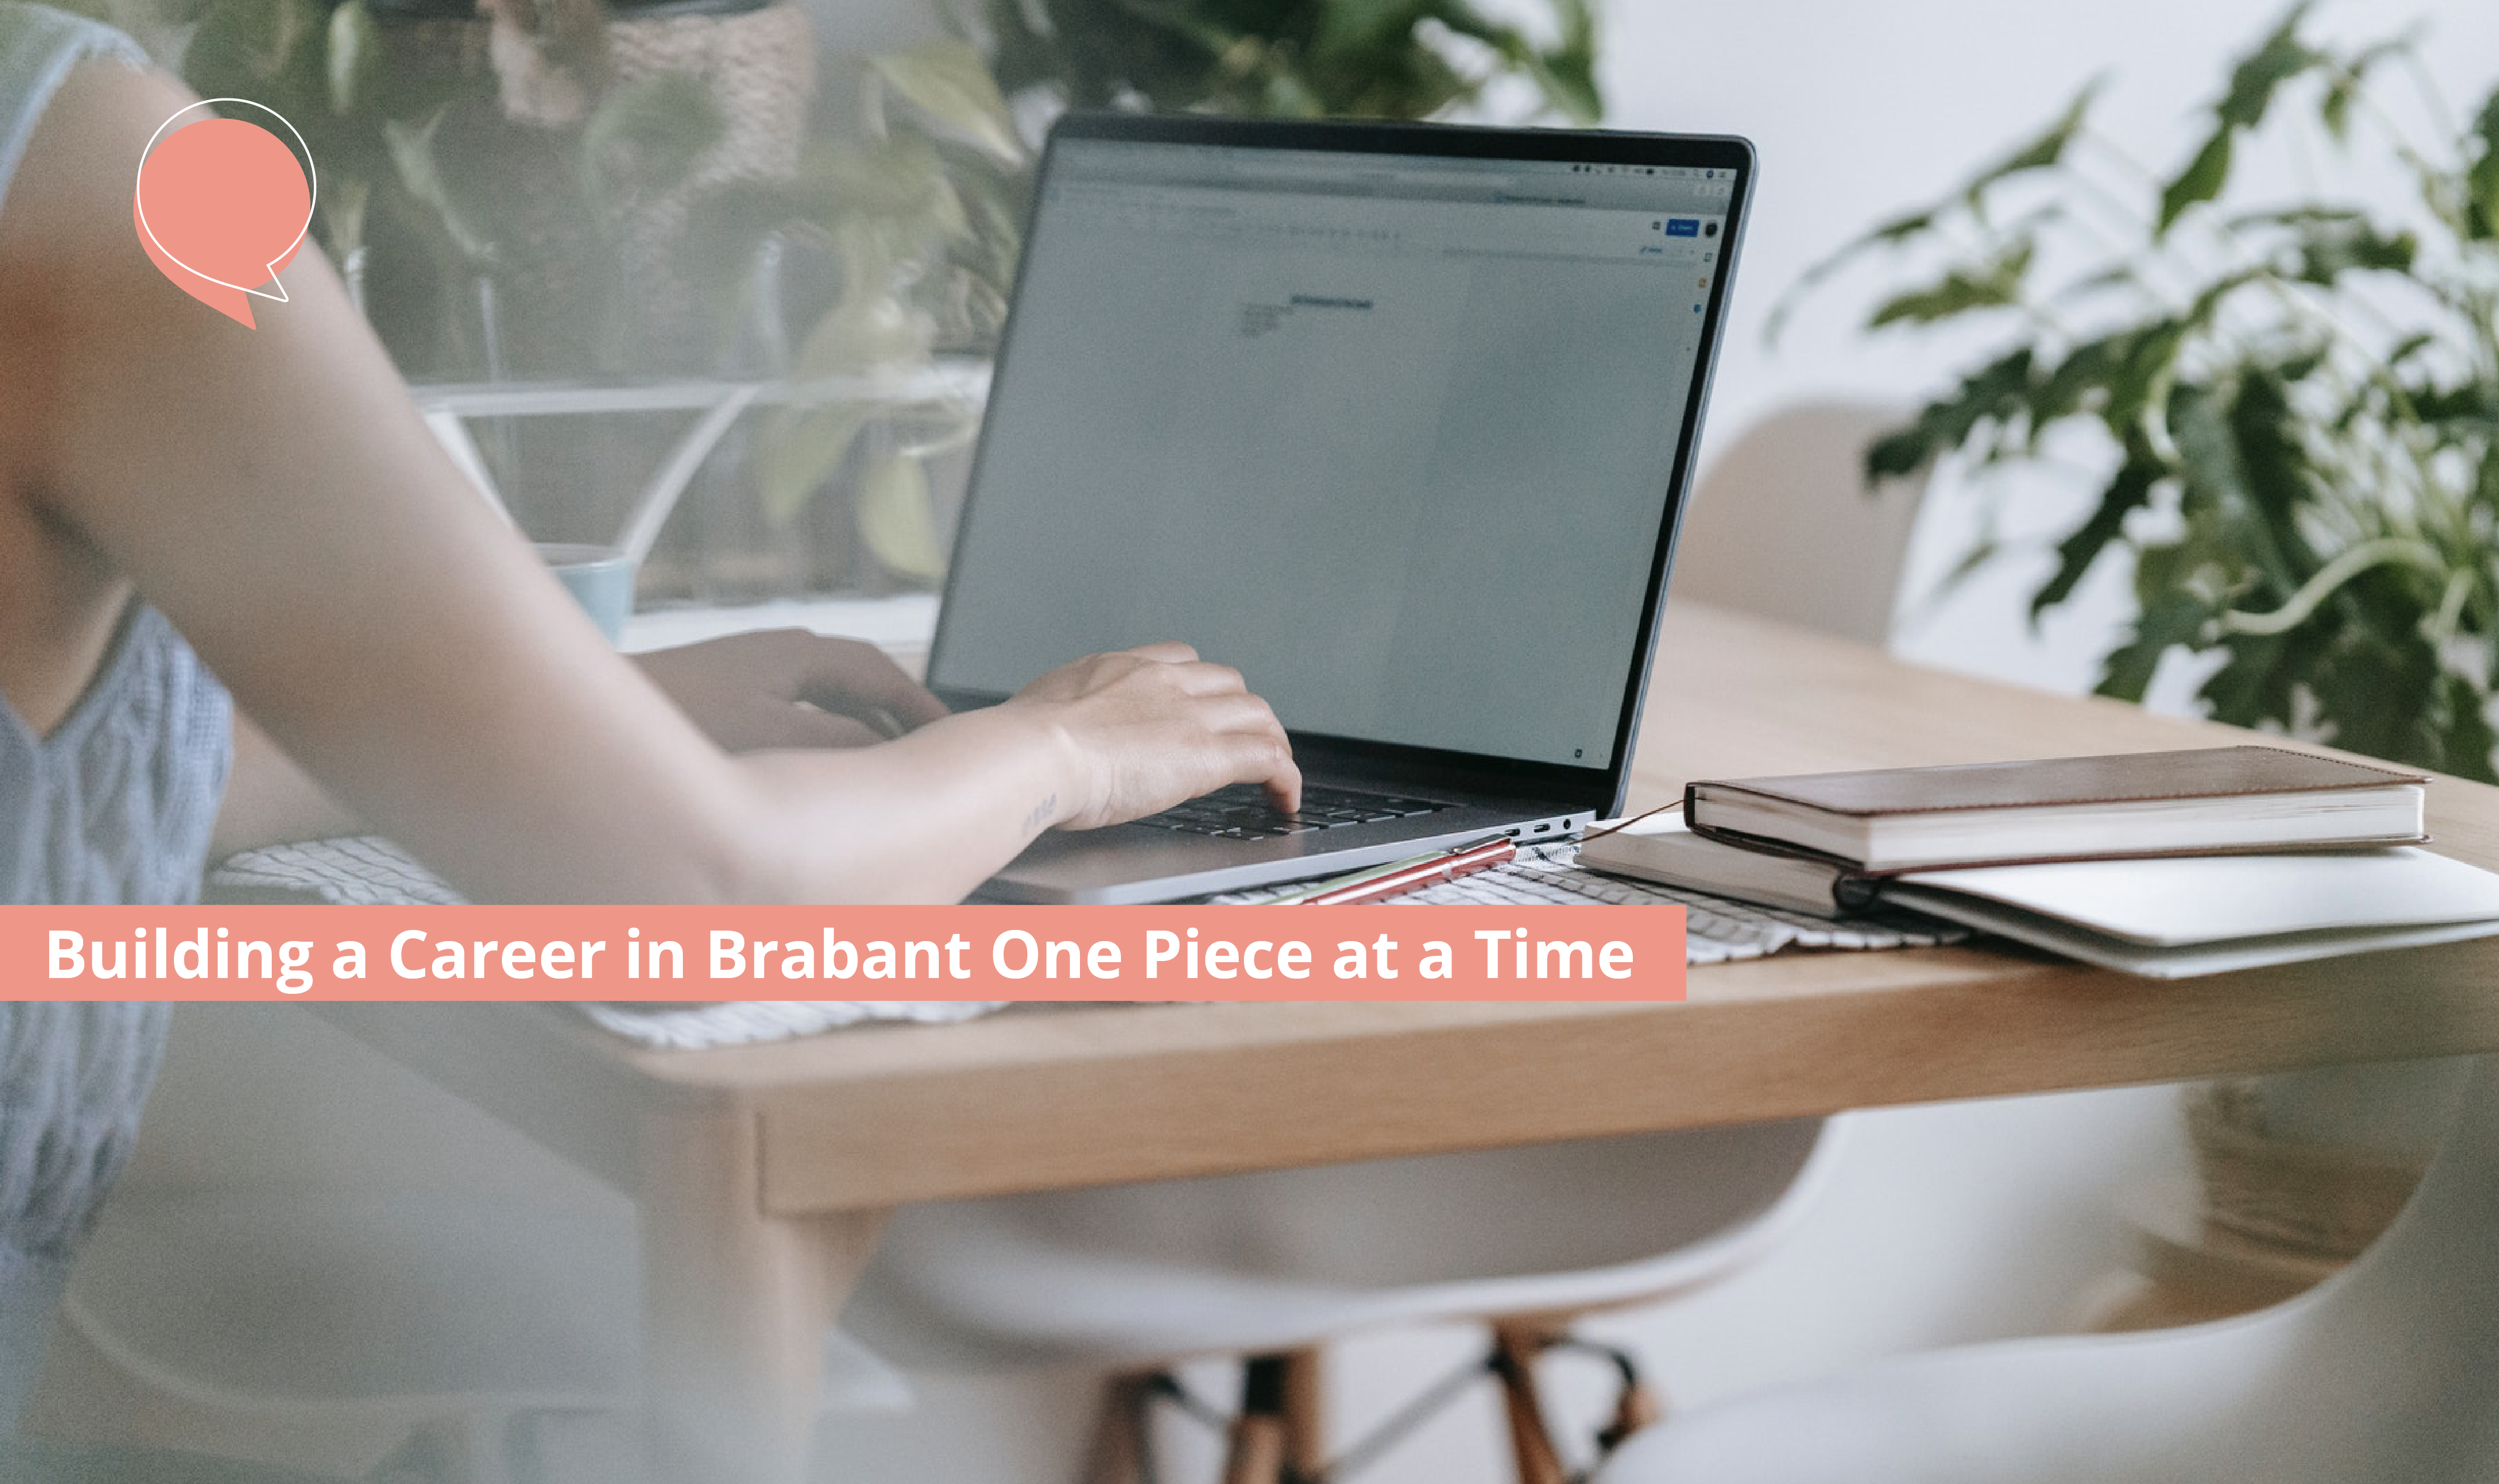 Building a Career in Brabant One Piece at a Time